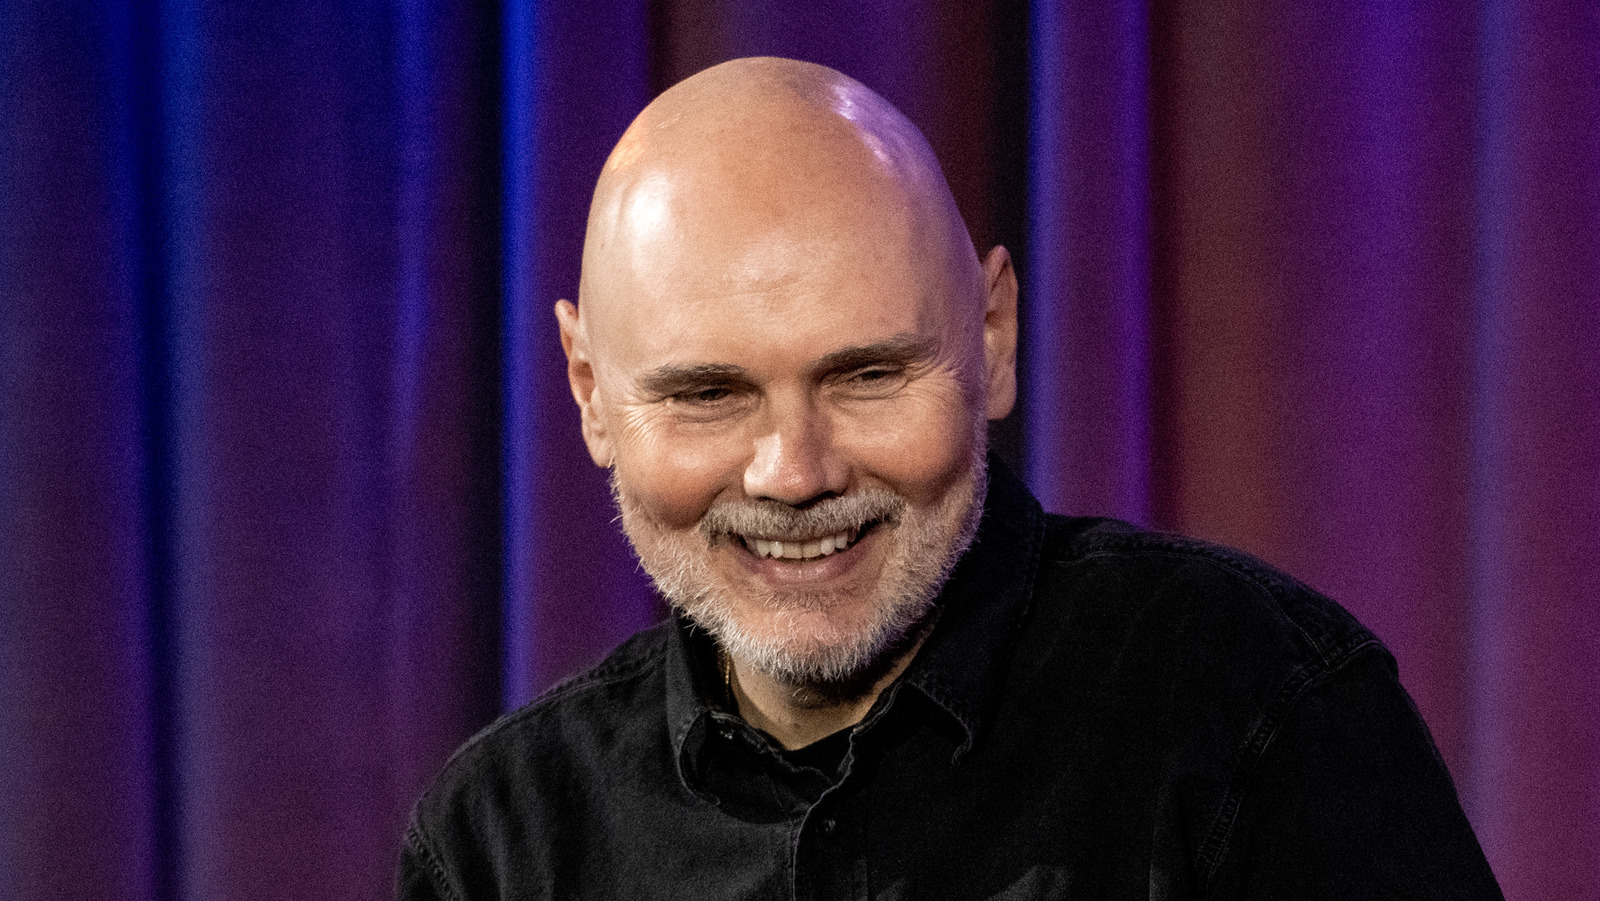 NWA President Billy Corgan Claims To Have Signed New TV Deal